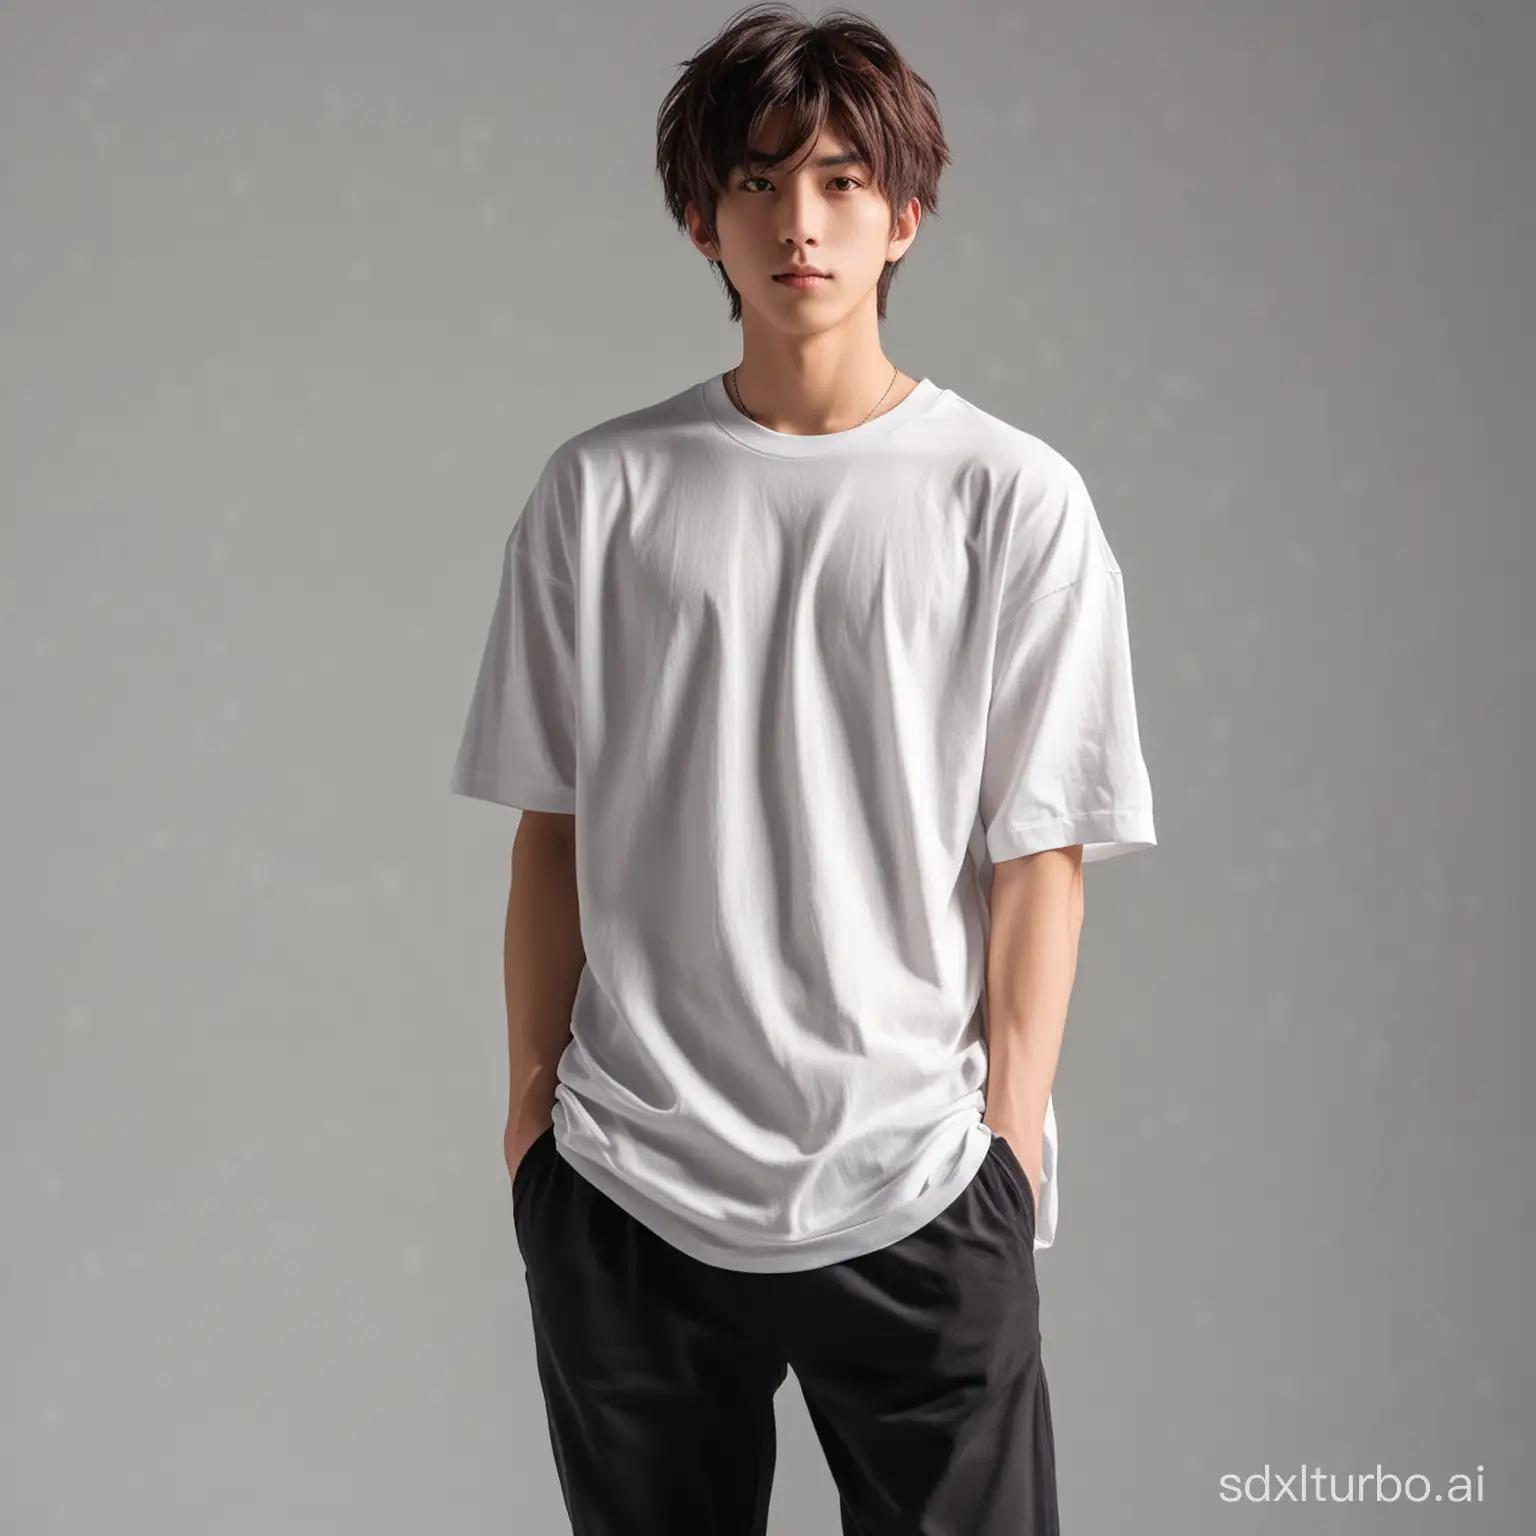 Muscular-Male-Anime-Character-in-Casual-Oversized-TShirt-Photoshoot